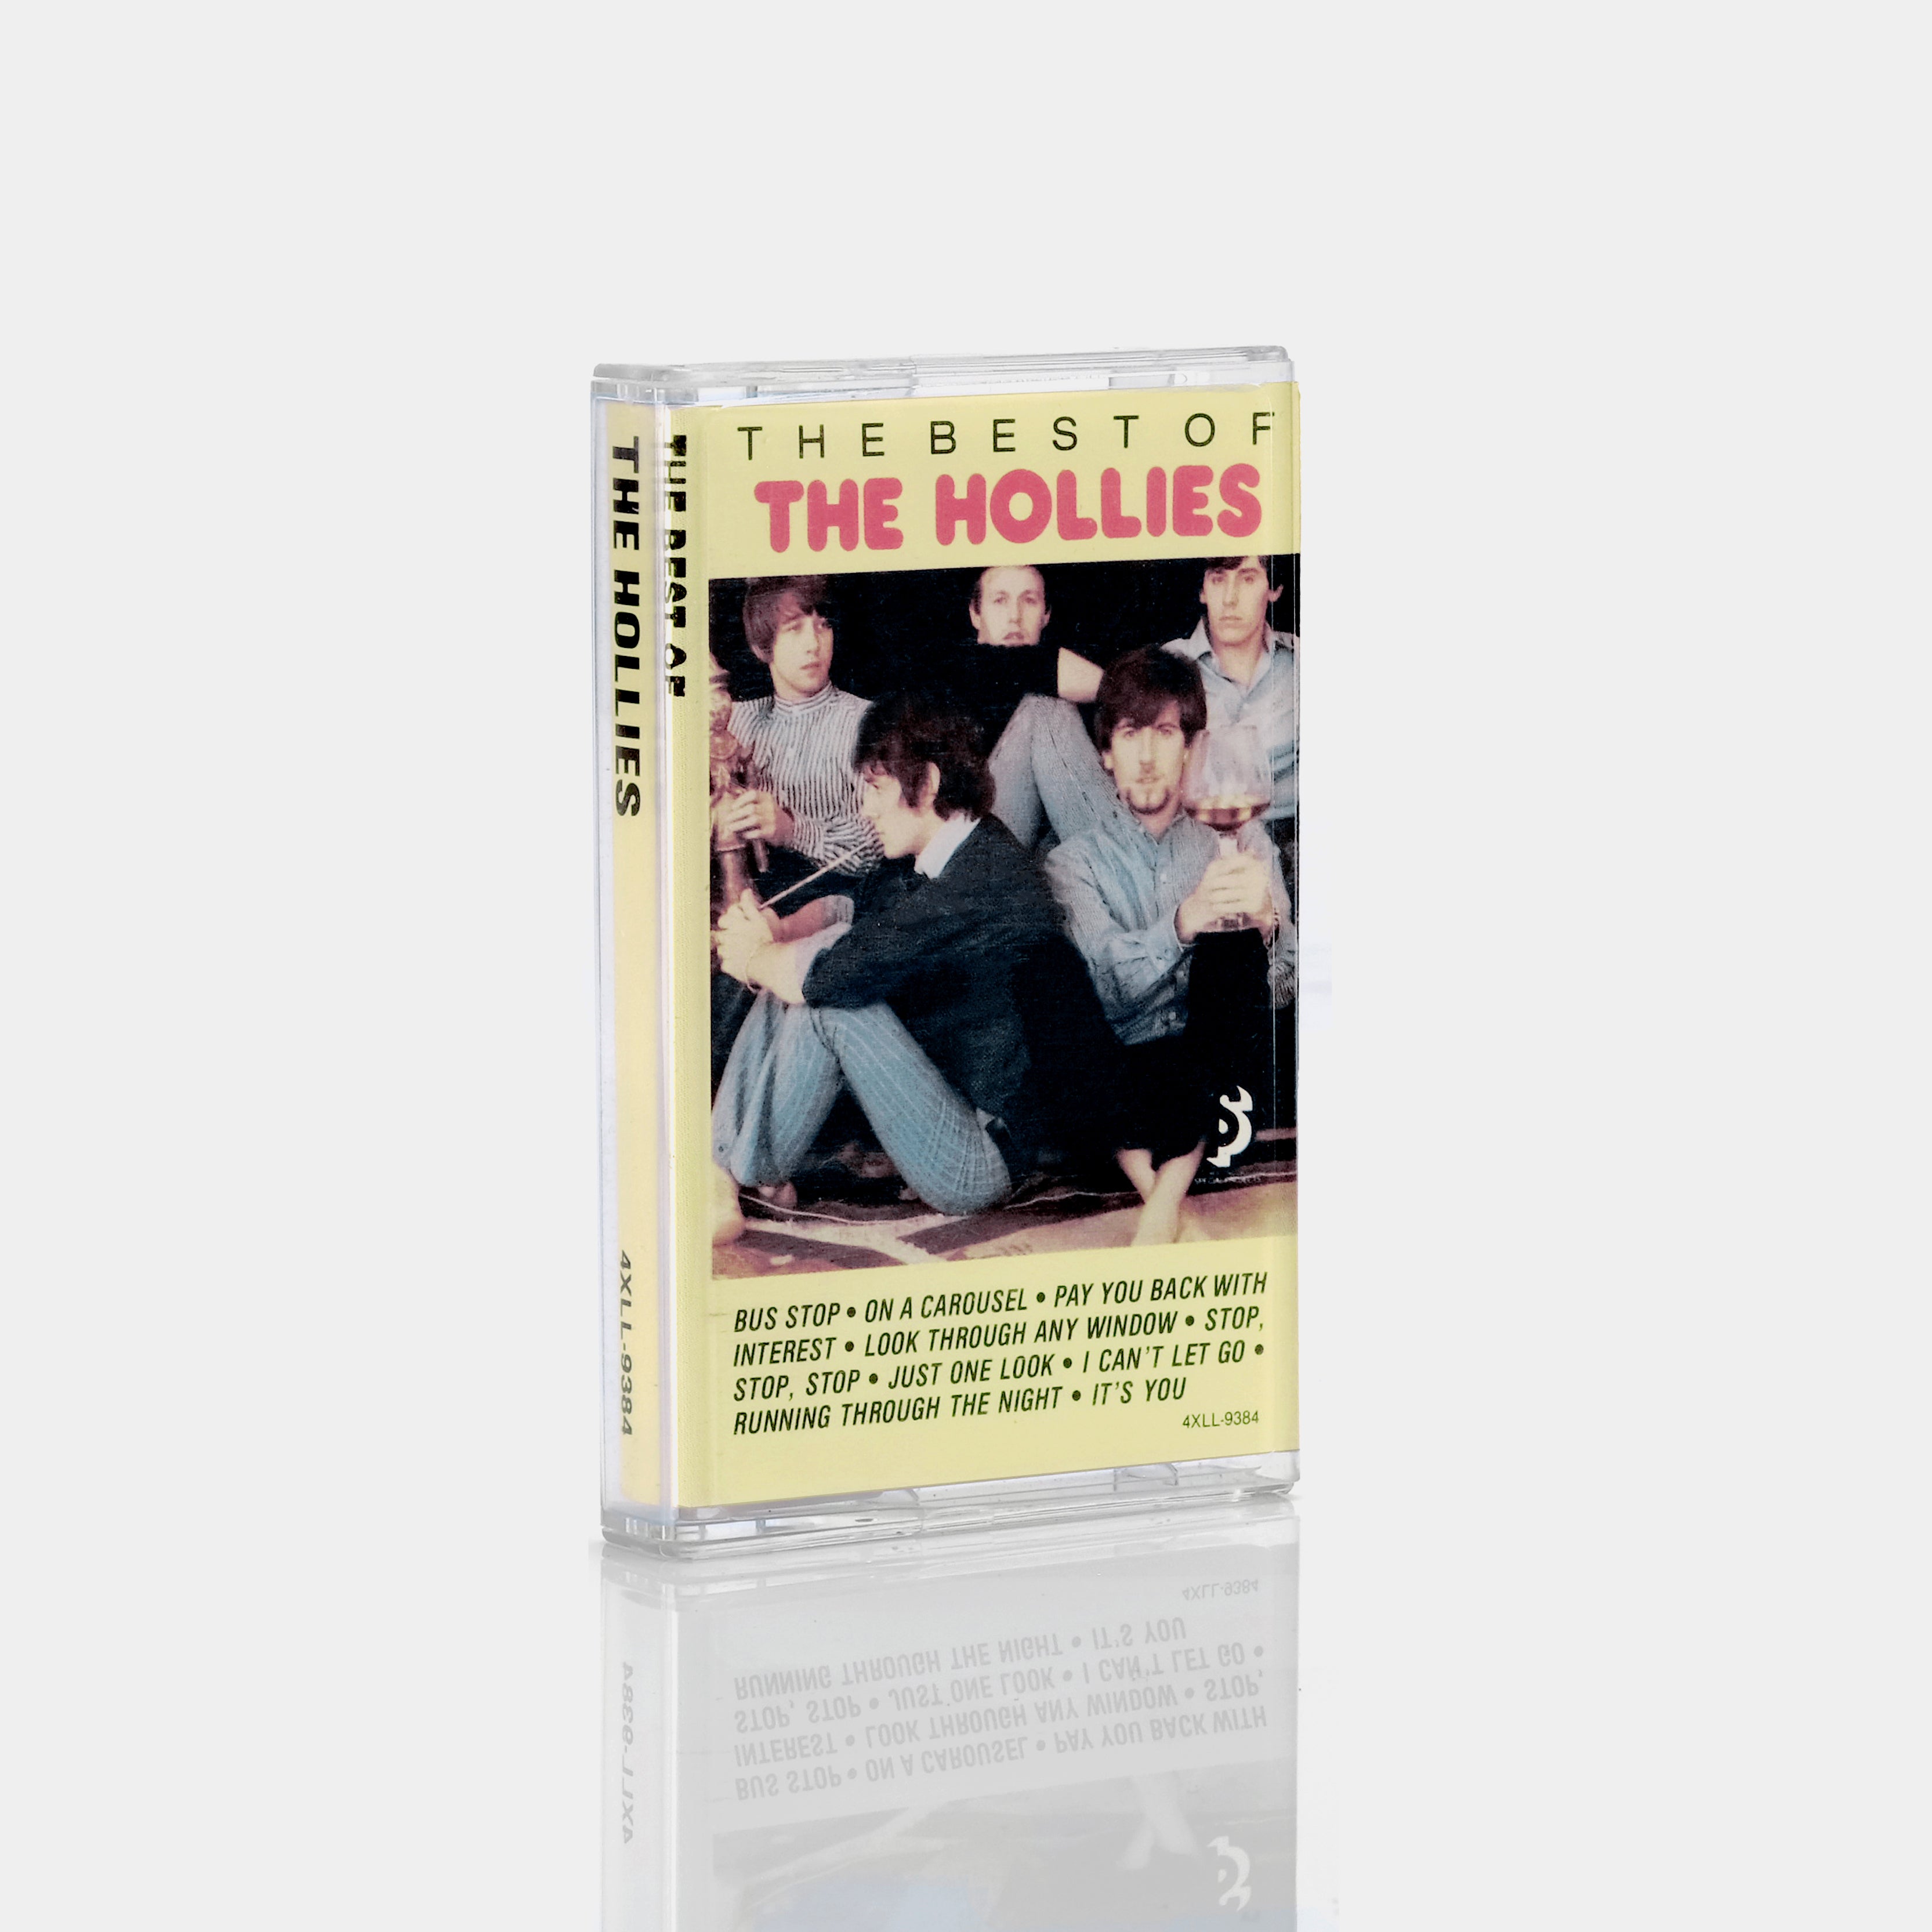 The Hollies - The Best Of The Hollies Cassette Tape